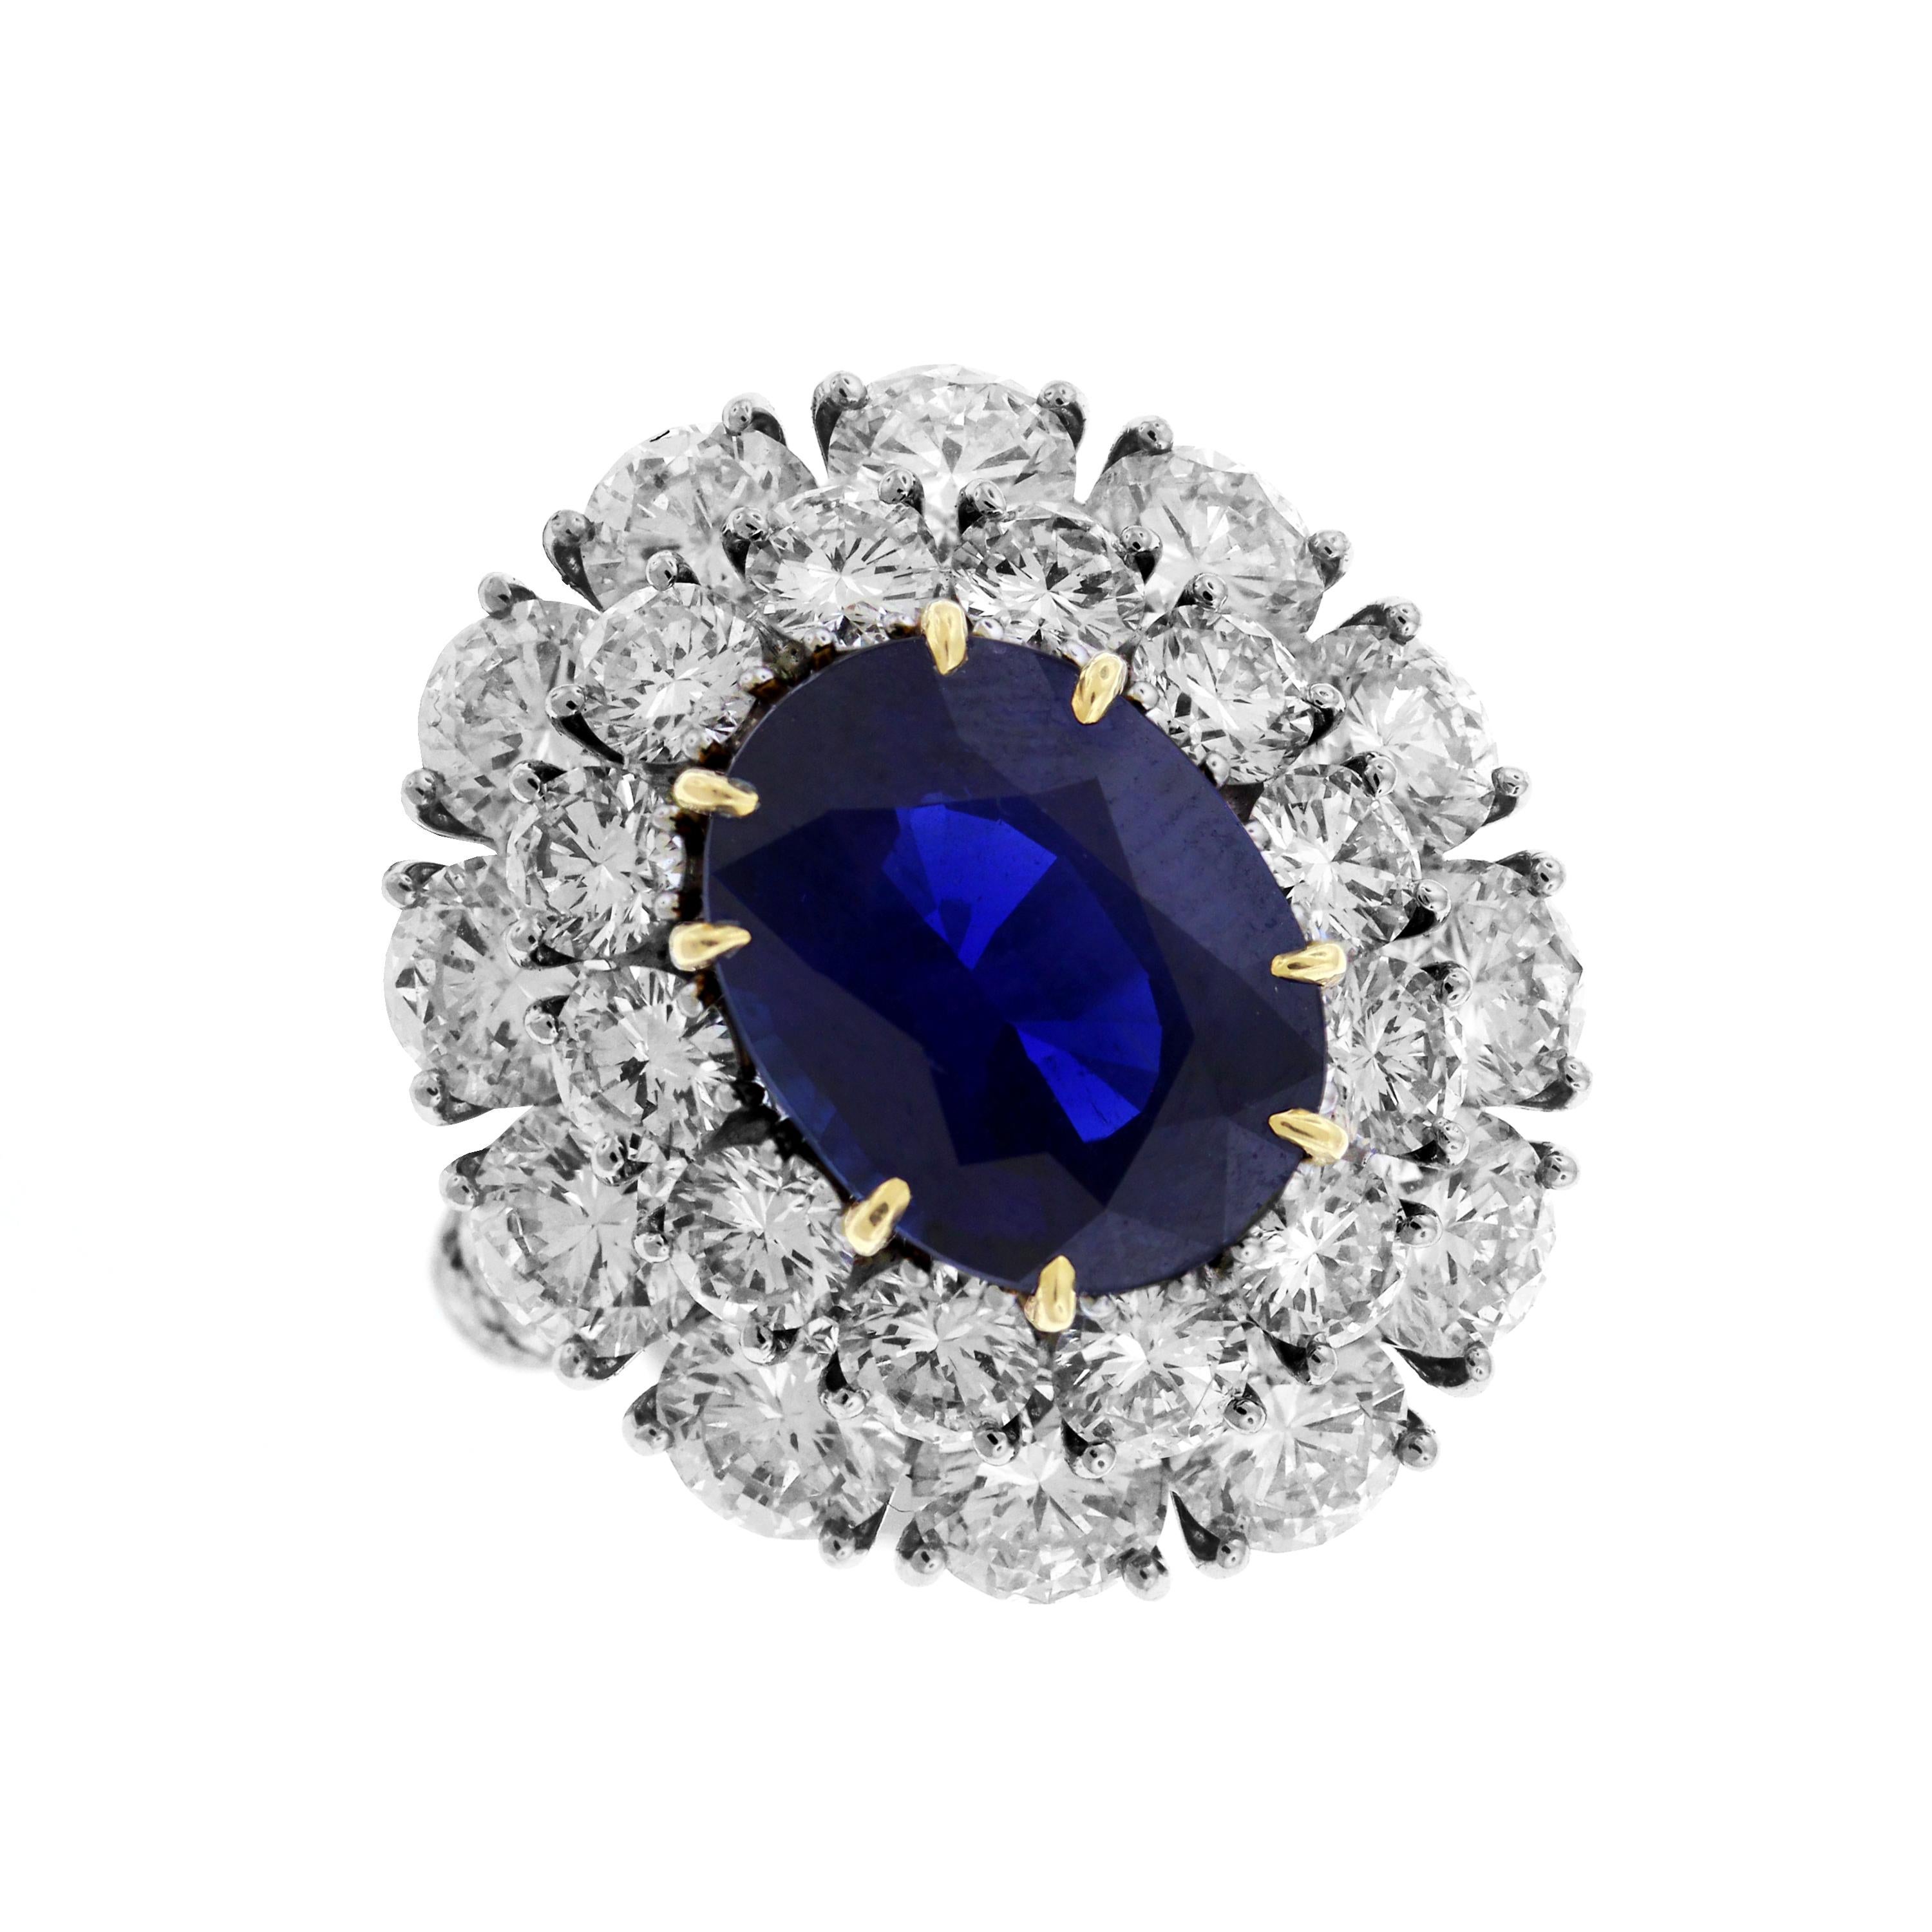 Platinum Ring with GIA Certified No-Heat Burma Sapphire center and Diamonds

This No-Heart, Burma, GIA Certified Blue Sapphire is truly remarkable and for a collector. It is a 5 carat oval-cut and measures 11.31mm x 9.17mm x 5.17 mm. GIA Report #: